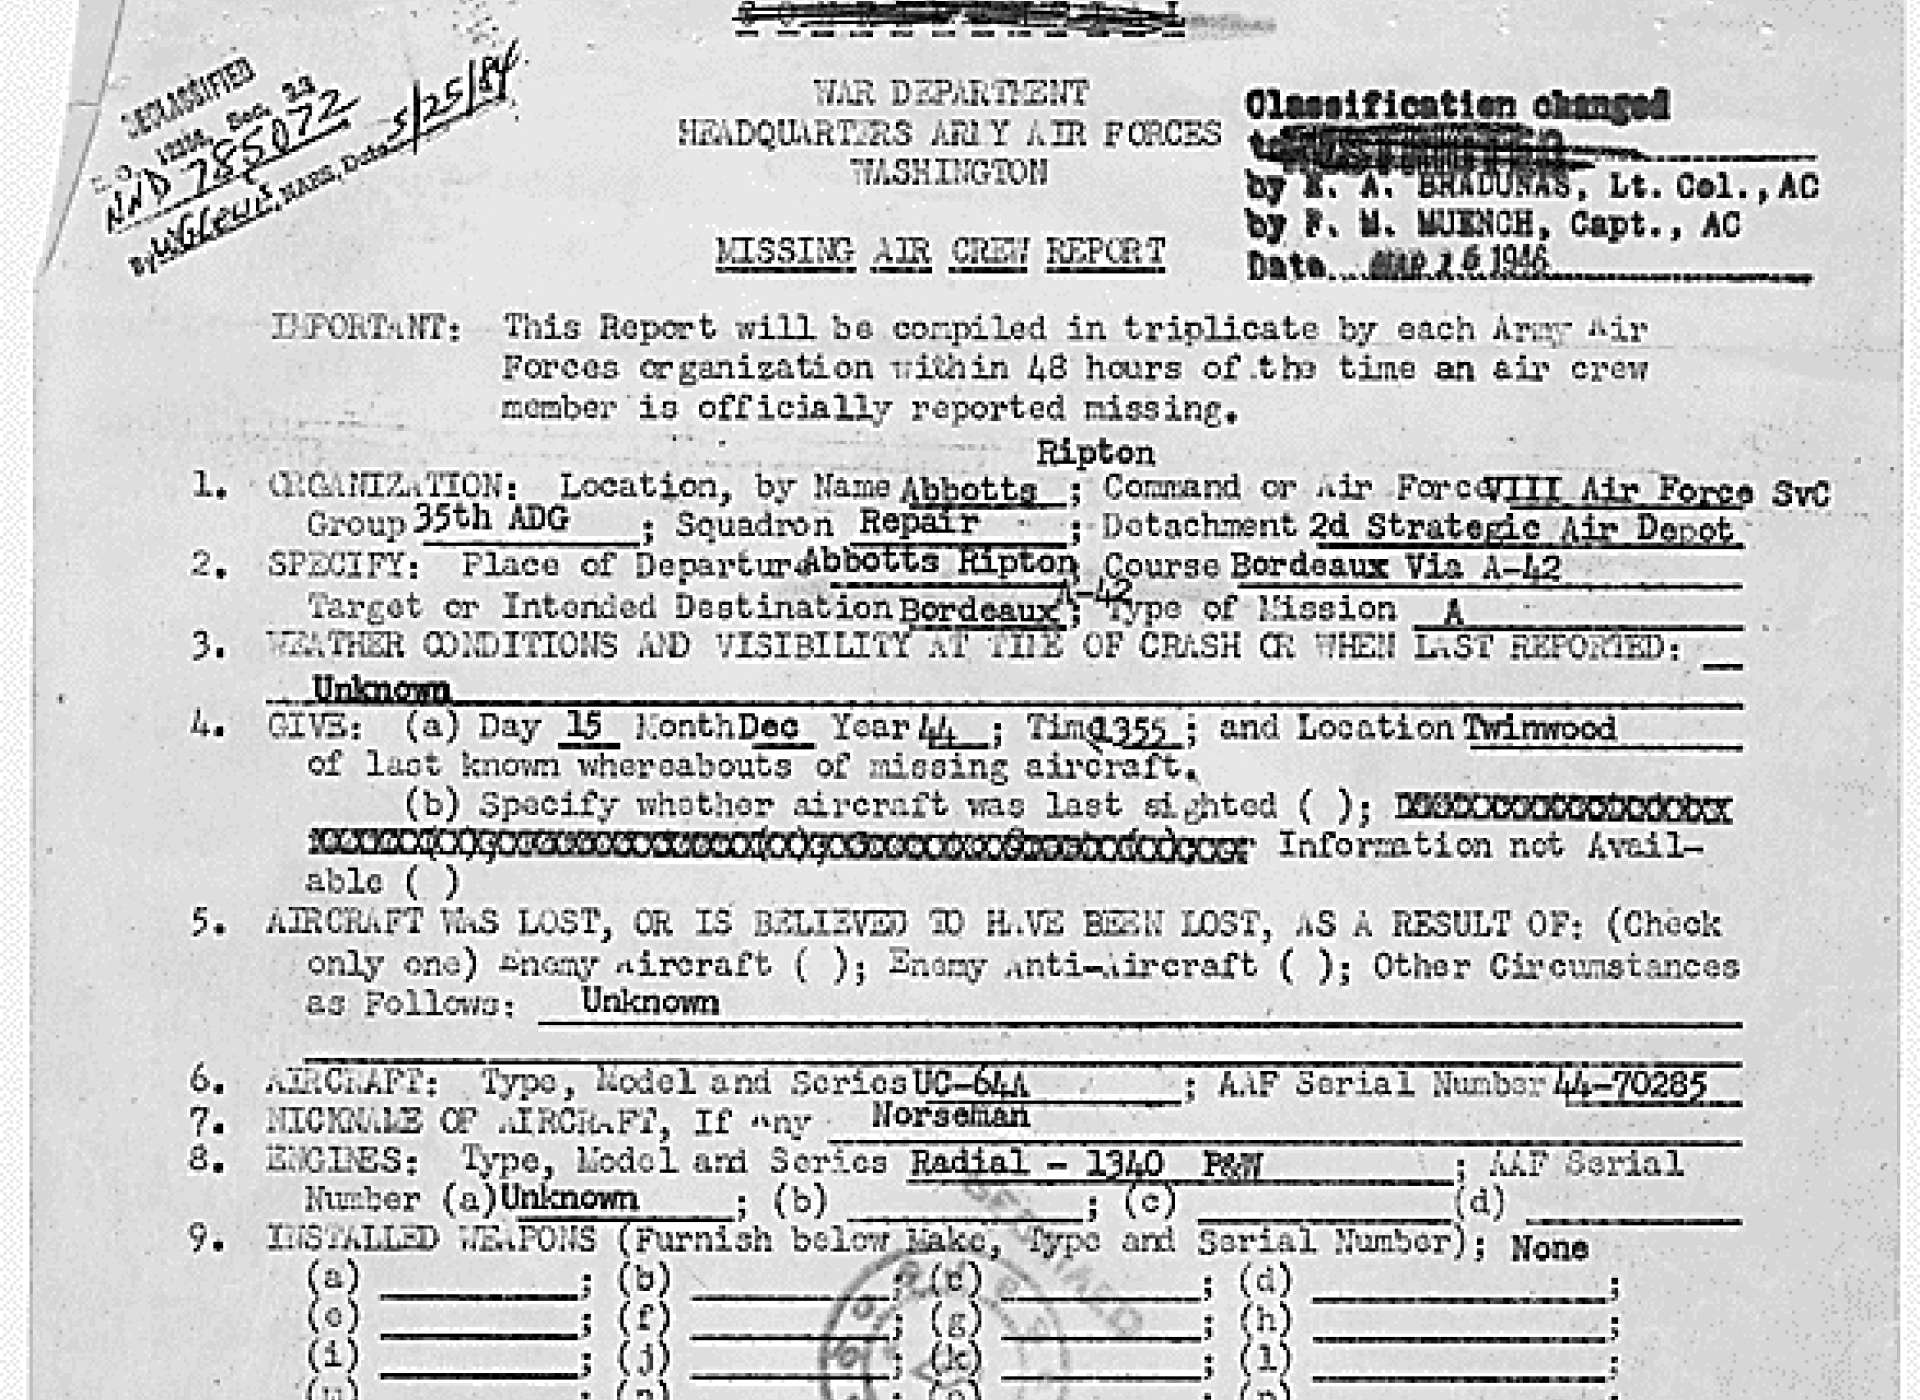 The top page from the Missing Air Crew Report, amended to add Miller and Baessell as passengers. Missing Air Crew Report No. 44-70285, the National Archives via Fold3.